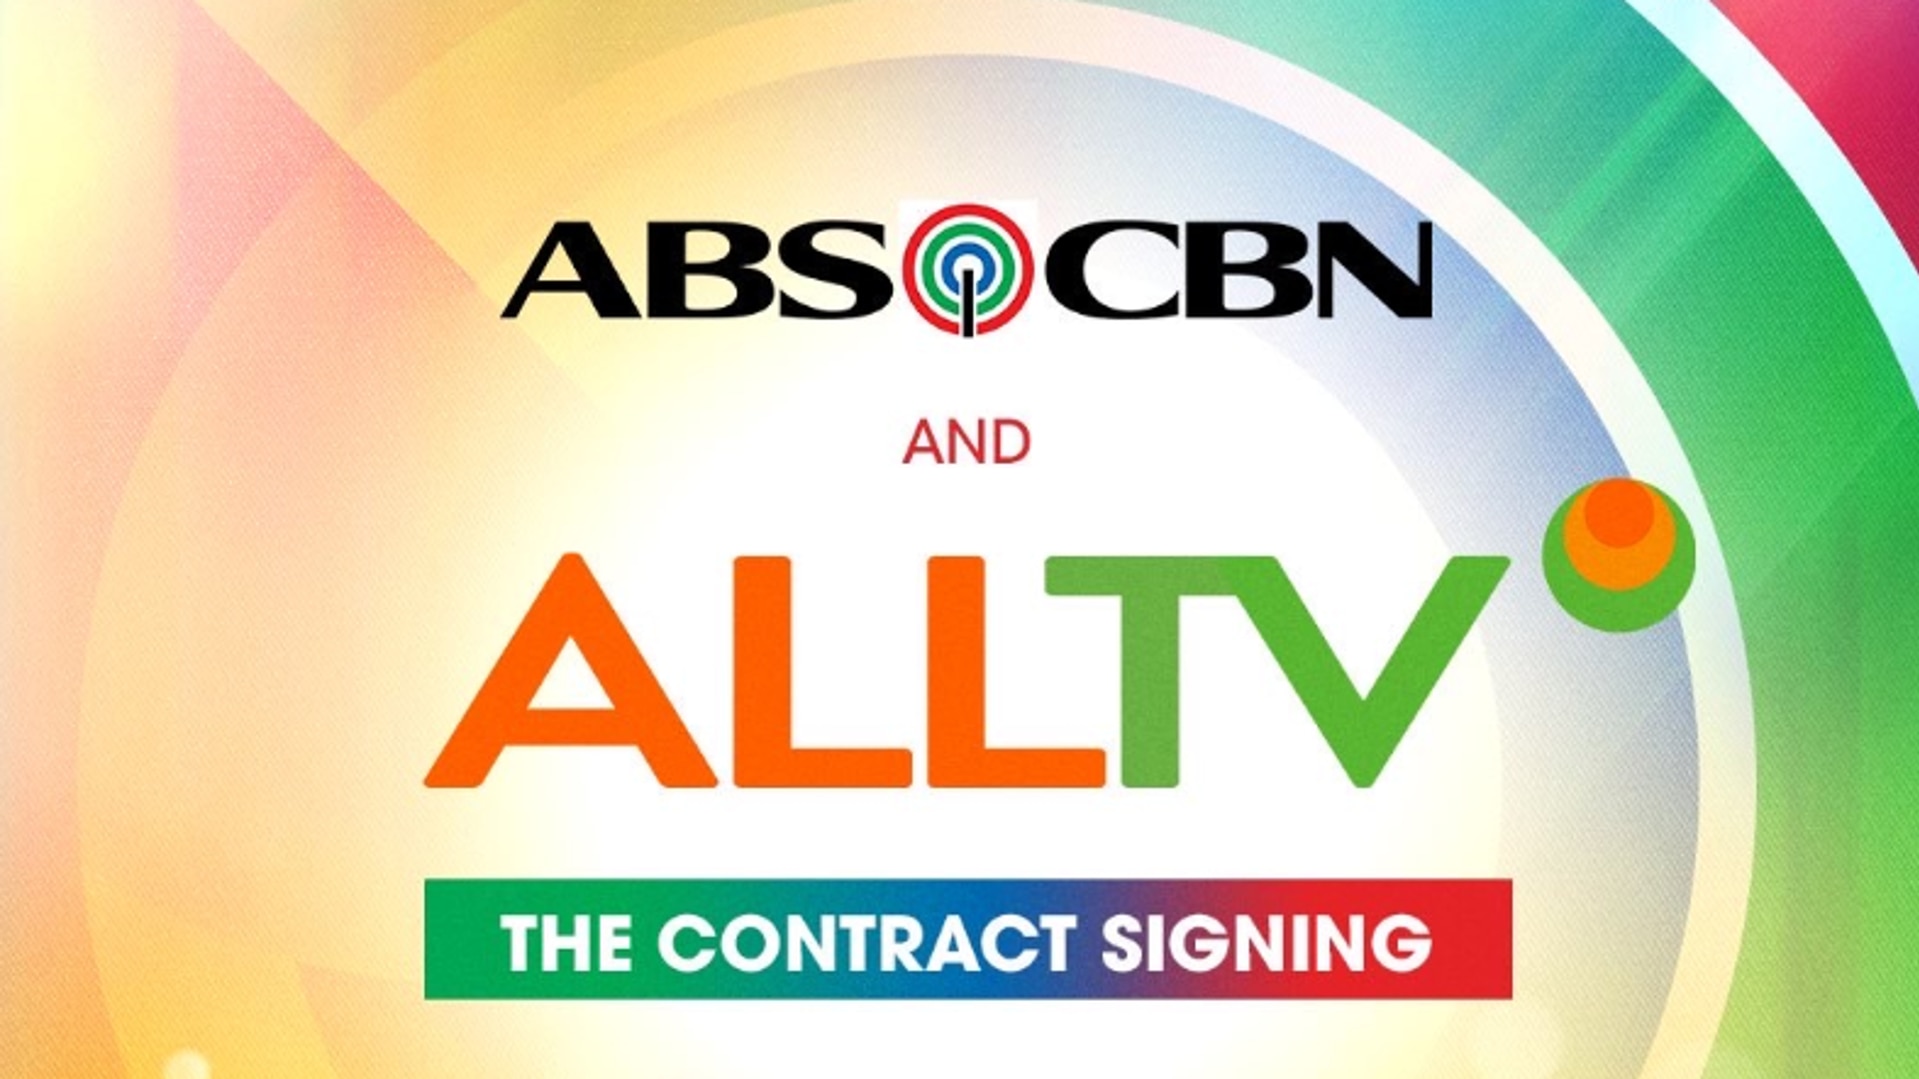 AMBS, ABS-CBN partner to bring iconic Kapamilya shows and TV Patrol on ALLTV